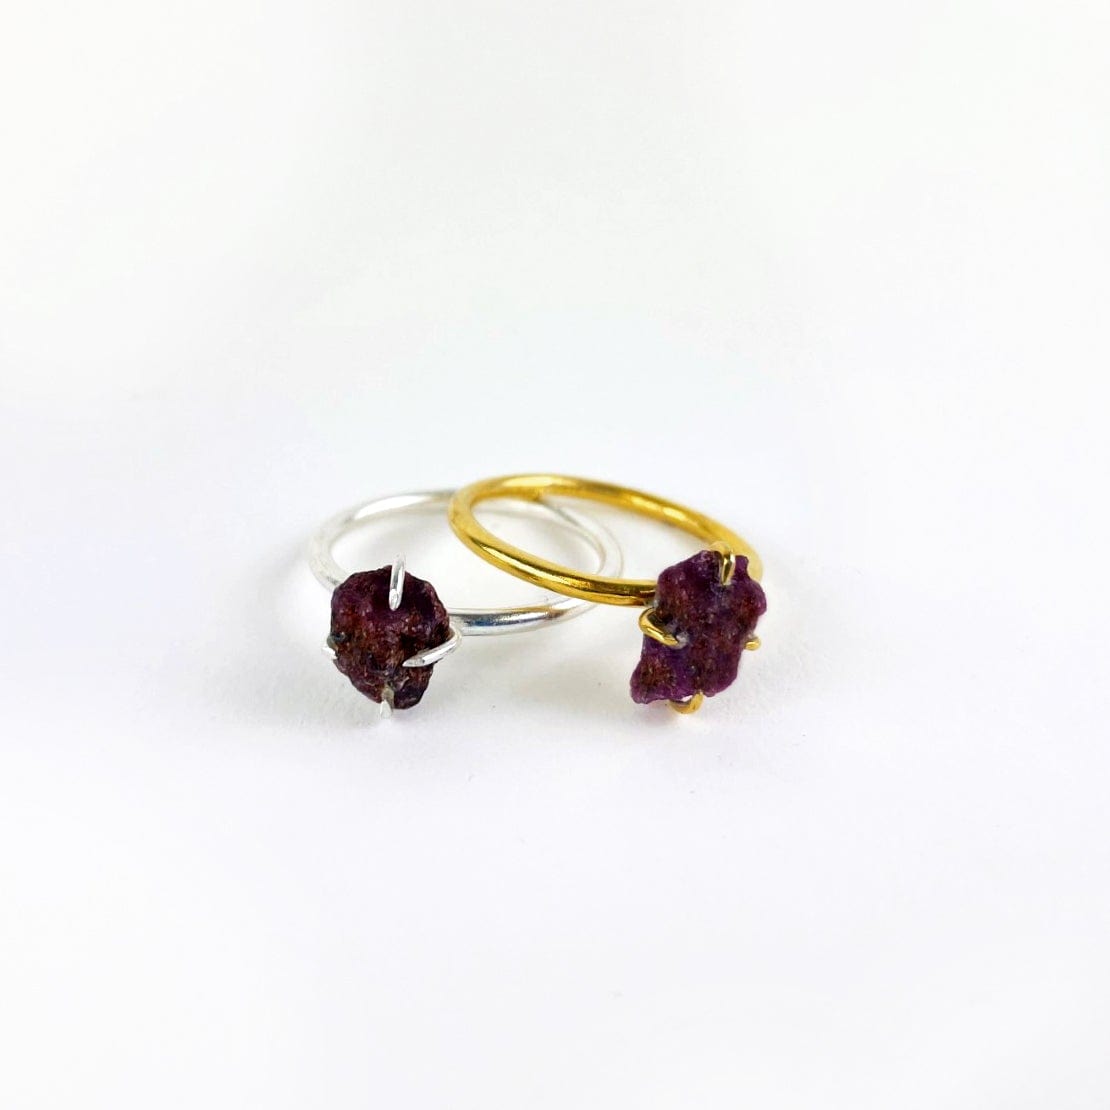 Ruby Gemstone Rings in Gold over Sterling Silver and Sterling Silver